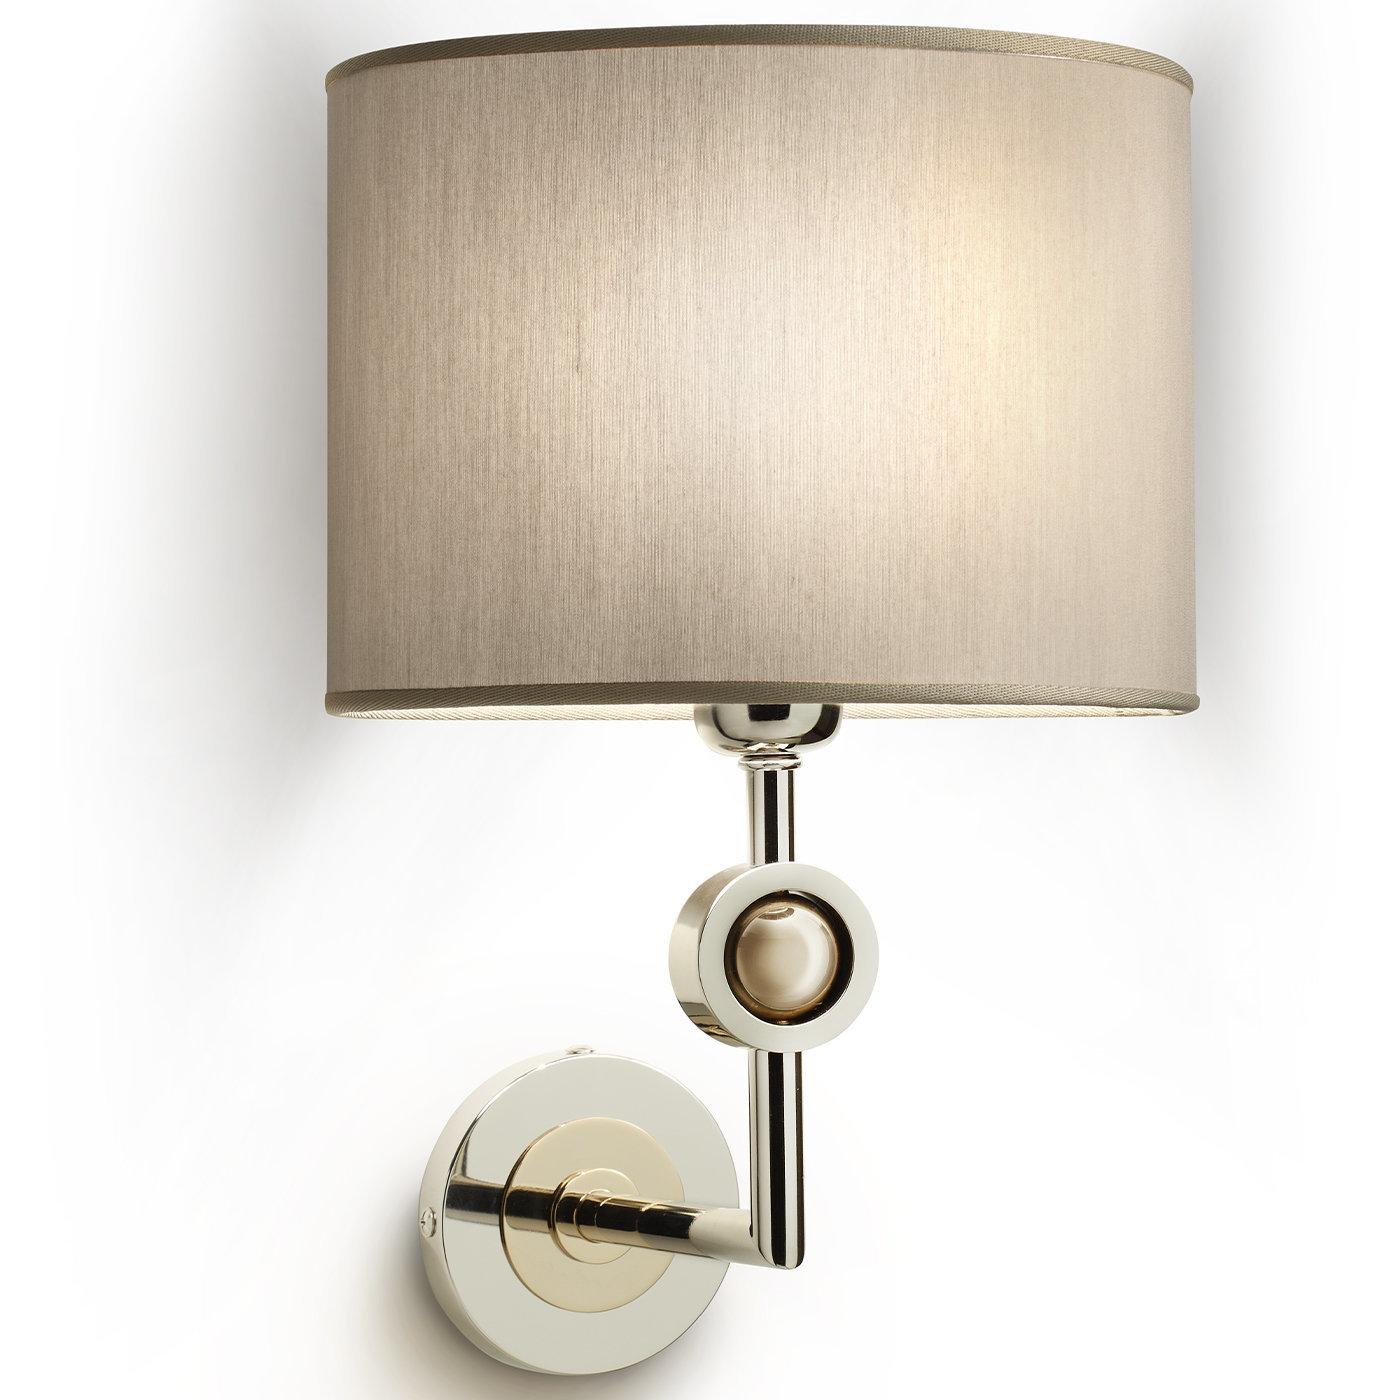 Flaunting an elegant brass structure finished in glossy nickel, this precious sconce is simultaneously illuminating and luminous. The right-angled arm connected to the circular wall mount is enlivened with a front finial harmonizing with the